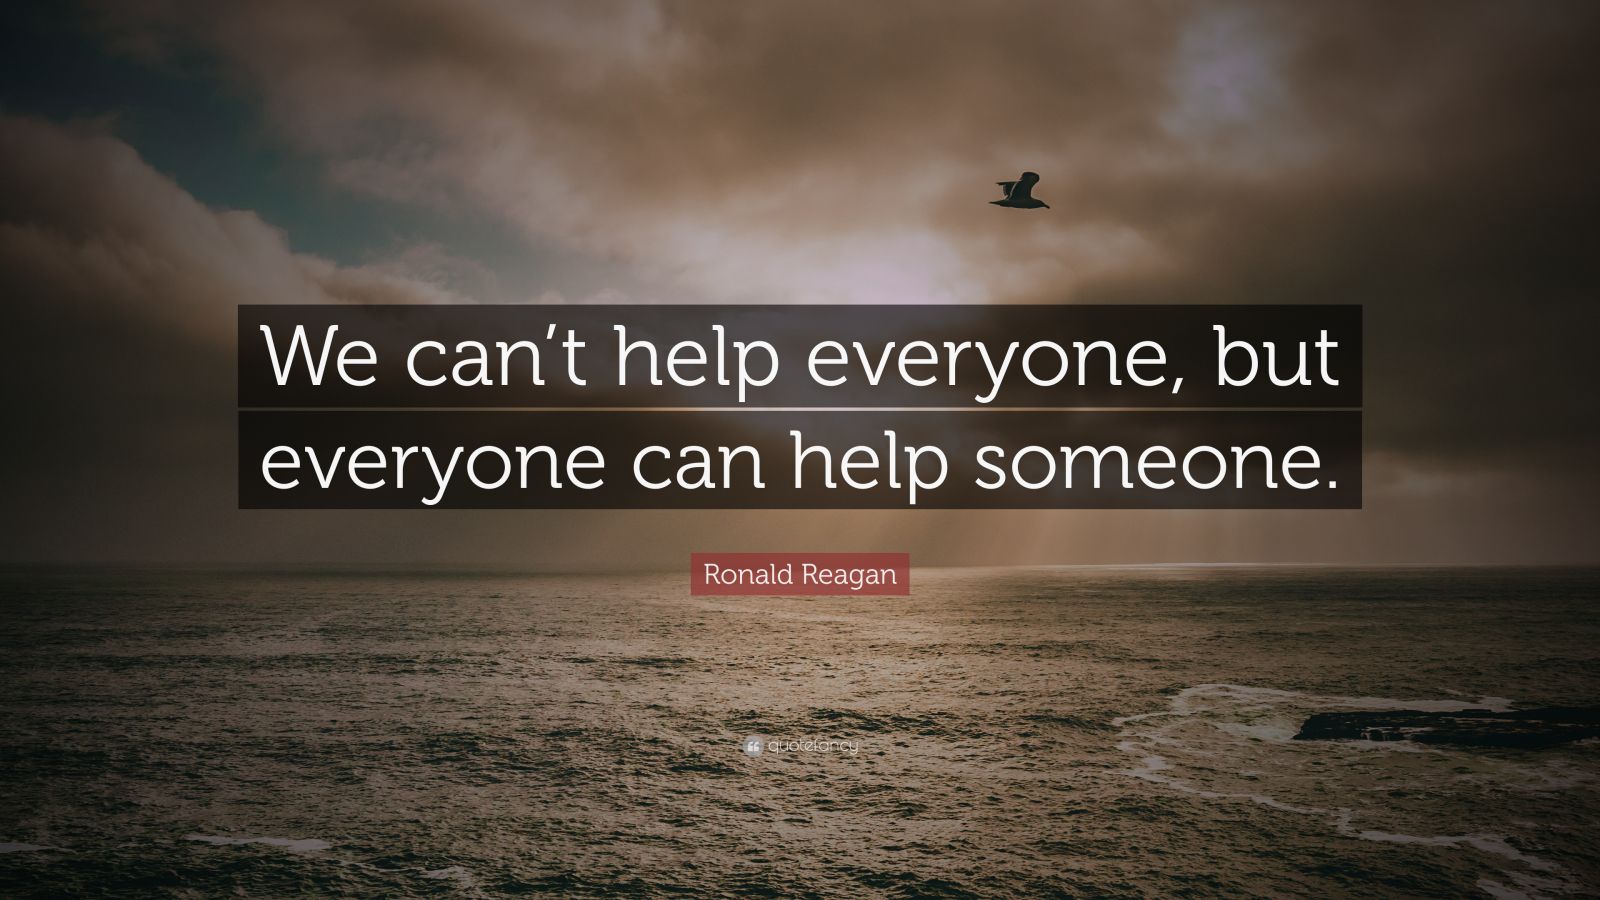 Ronald Reagan Quote: “We can’t help everyone, but everyone can help